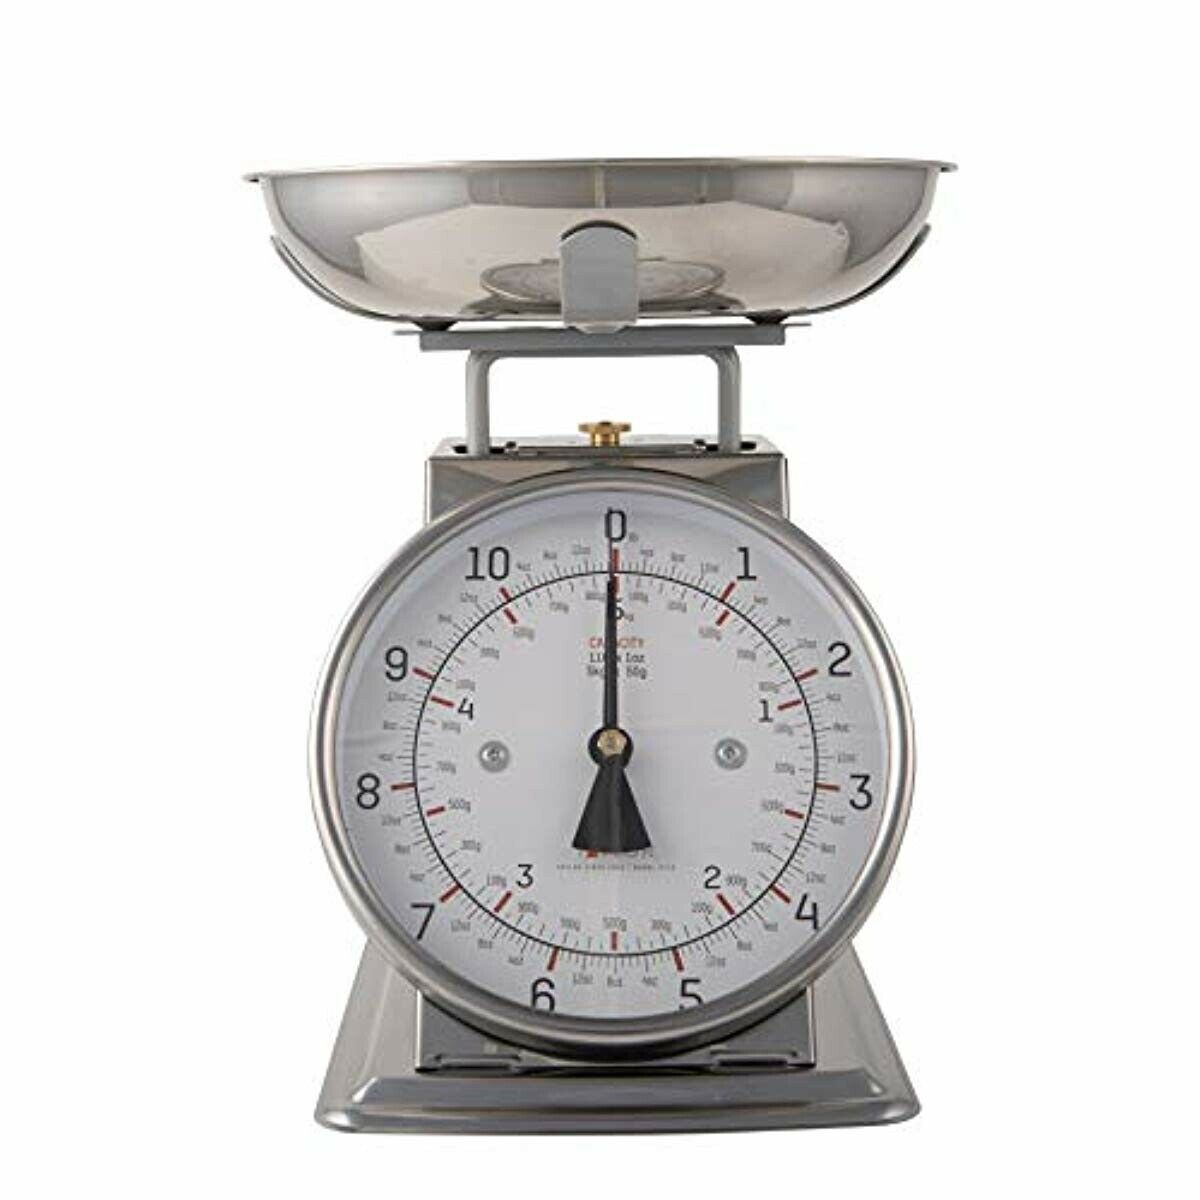 Taylor Stainless Steel Analog Kitchen Scale 11 Lb Capacity Kitchen